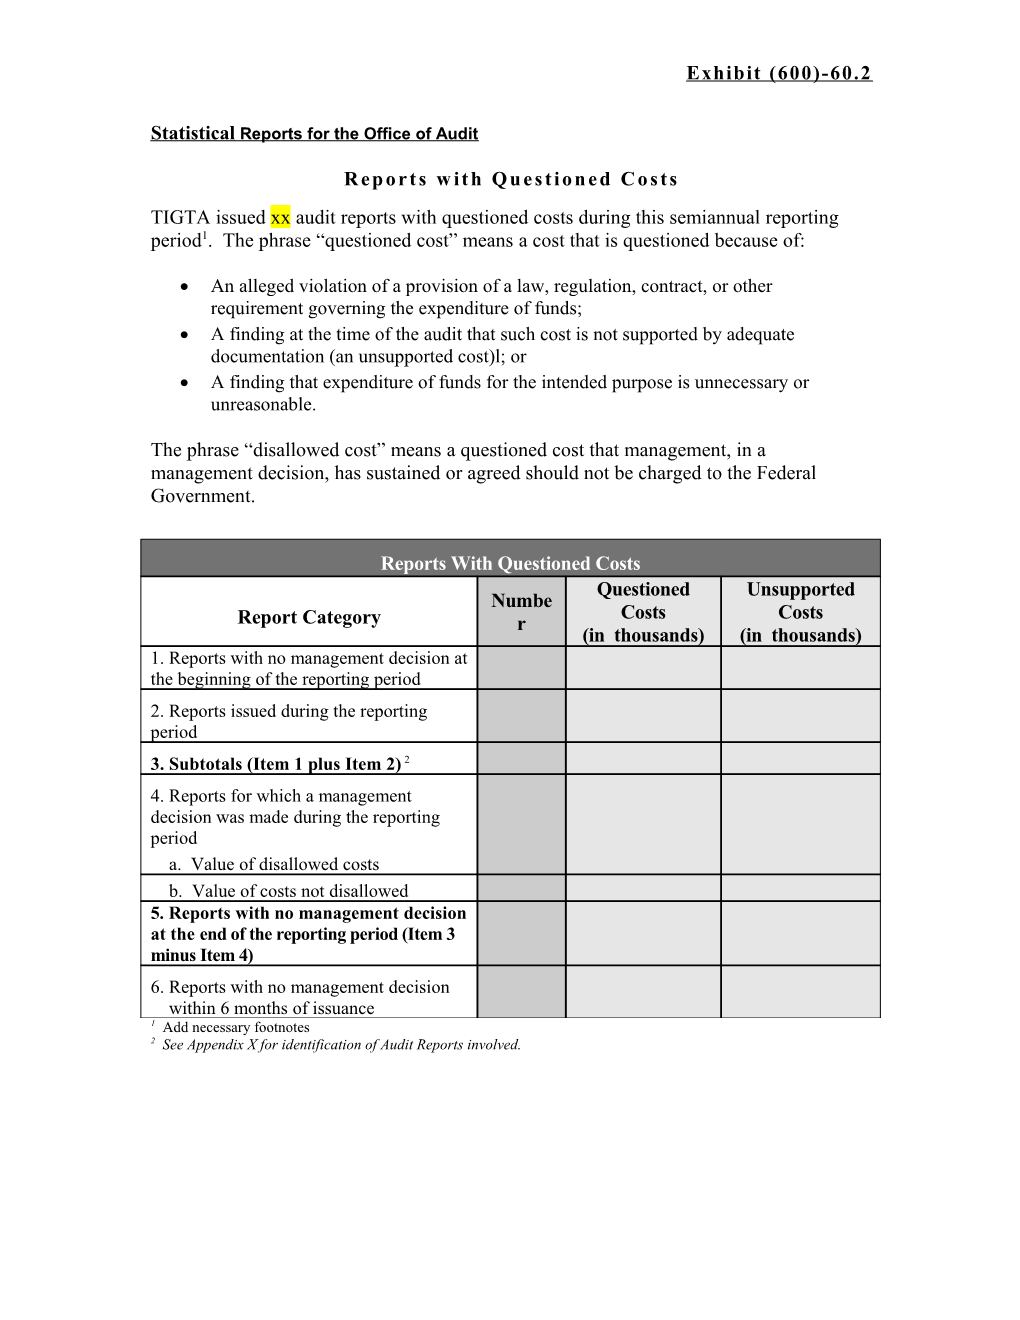 Statistical Reports for the Office of Audit